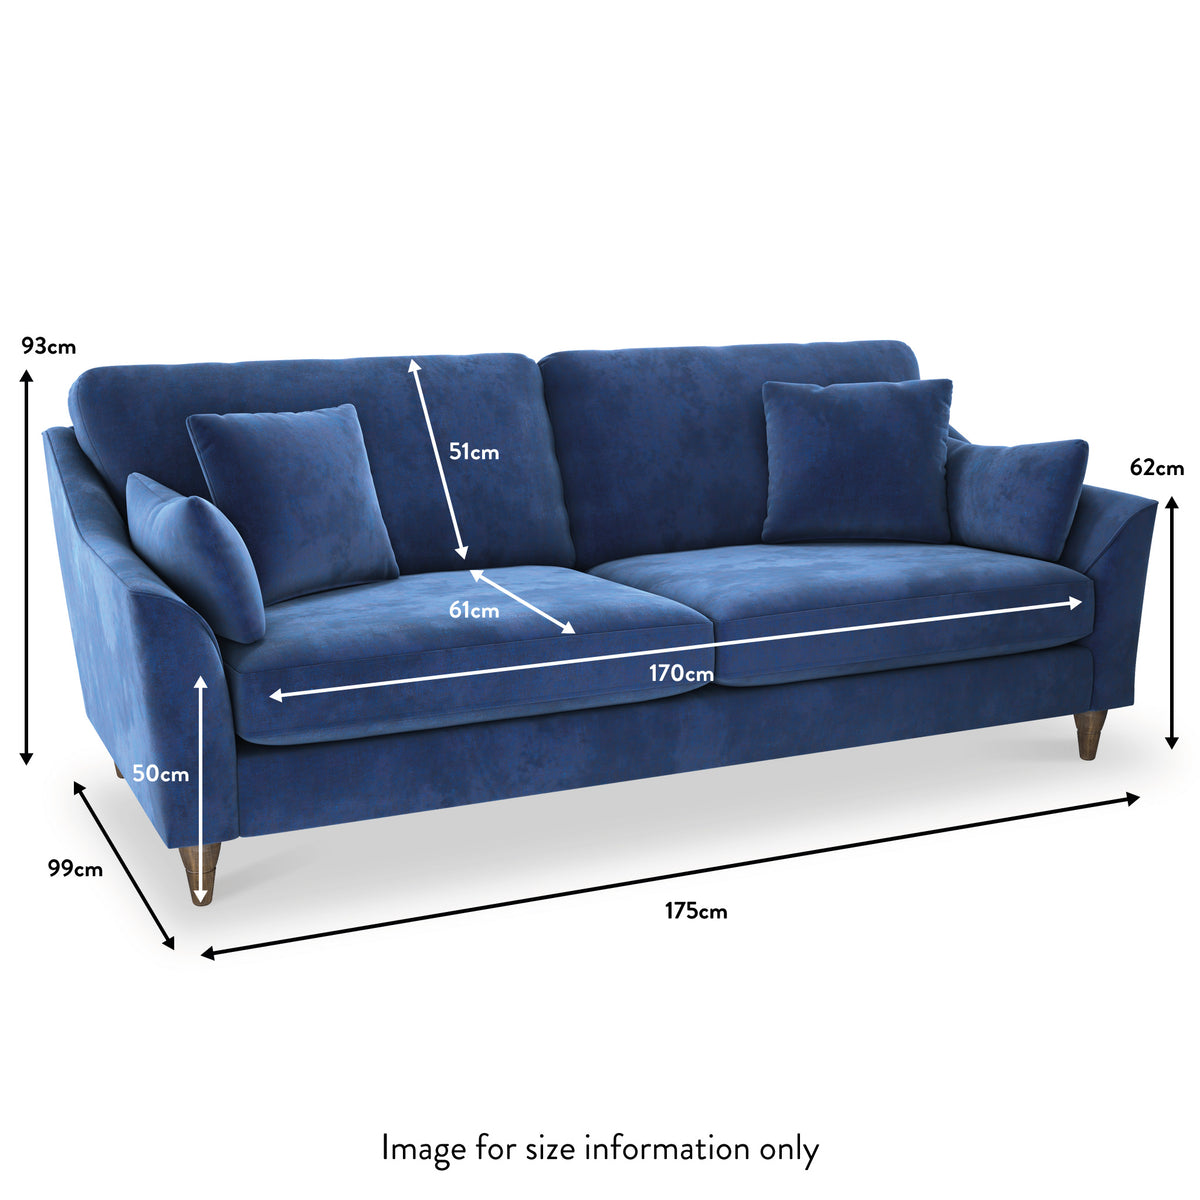 Charice Navy 3 Seater Sofa dimensions